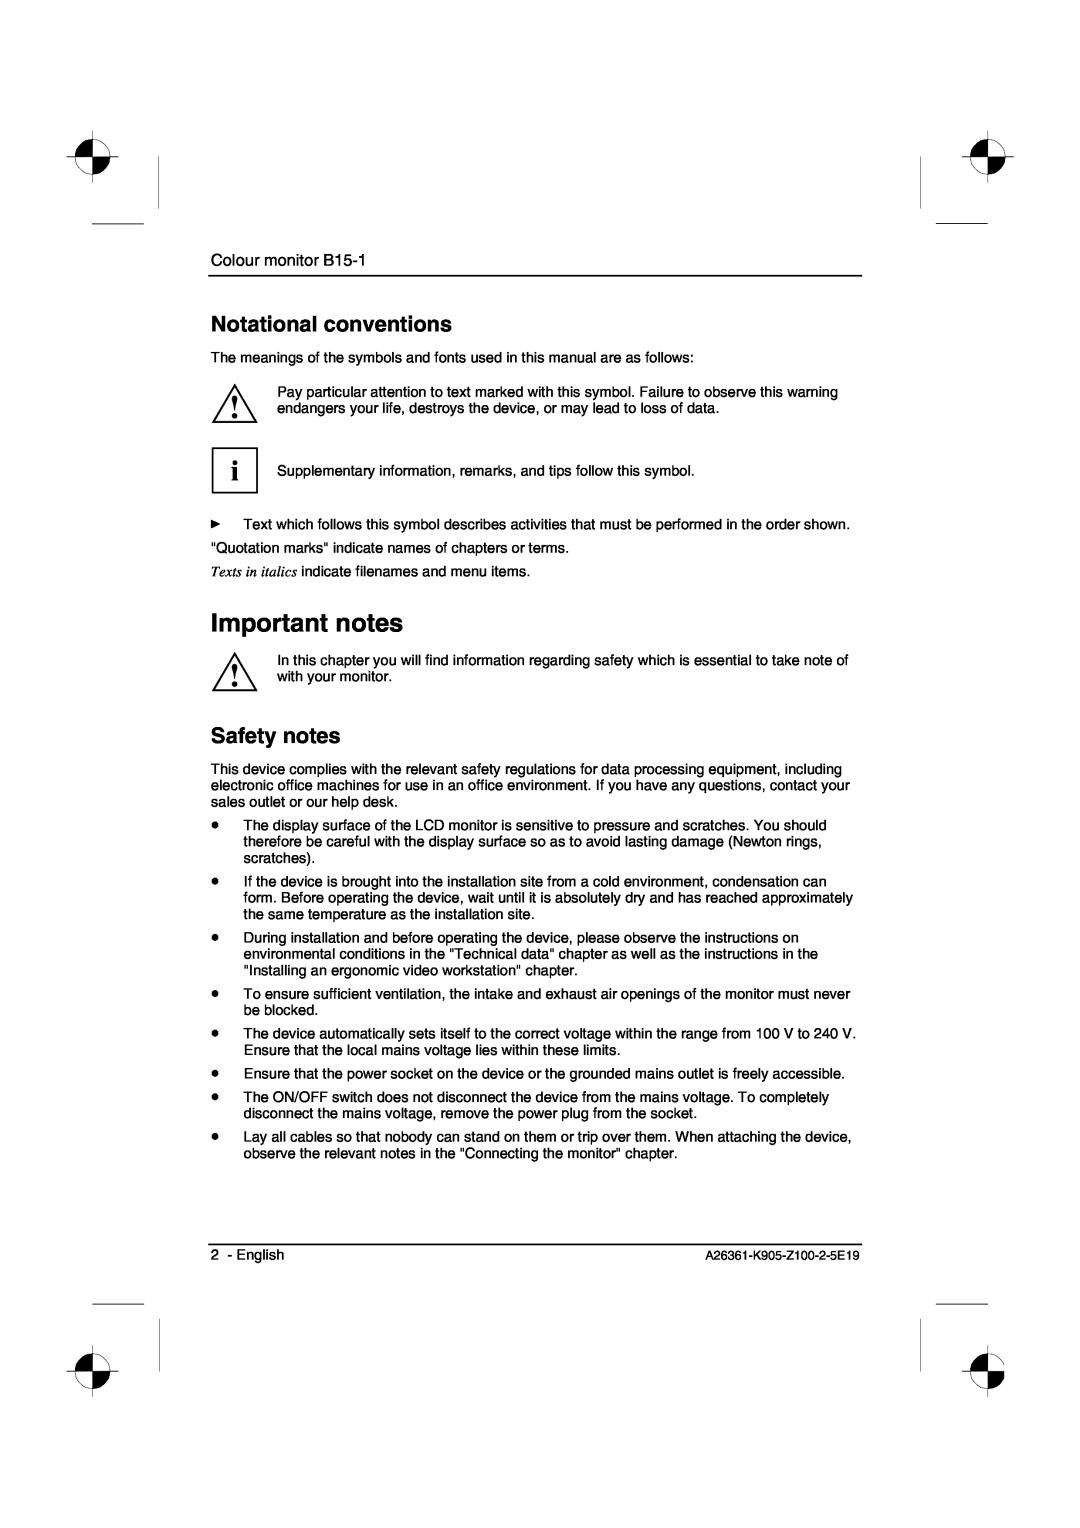 Fujitsu Siemens Computers manual Important notes, Notational conventions, Safety notes, Colour monitor B15-1 